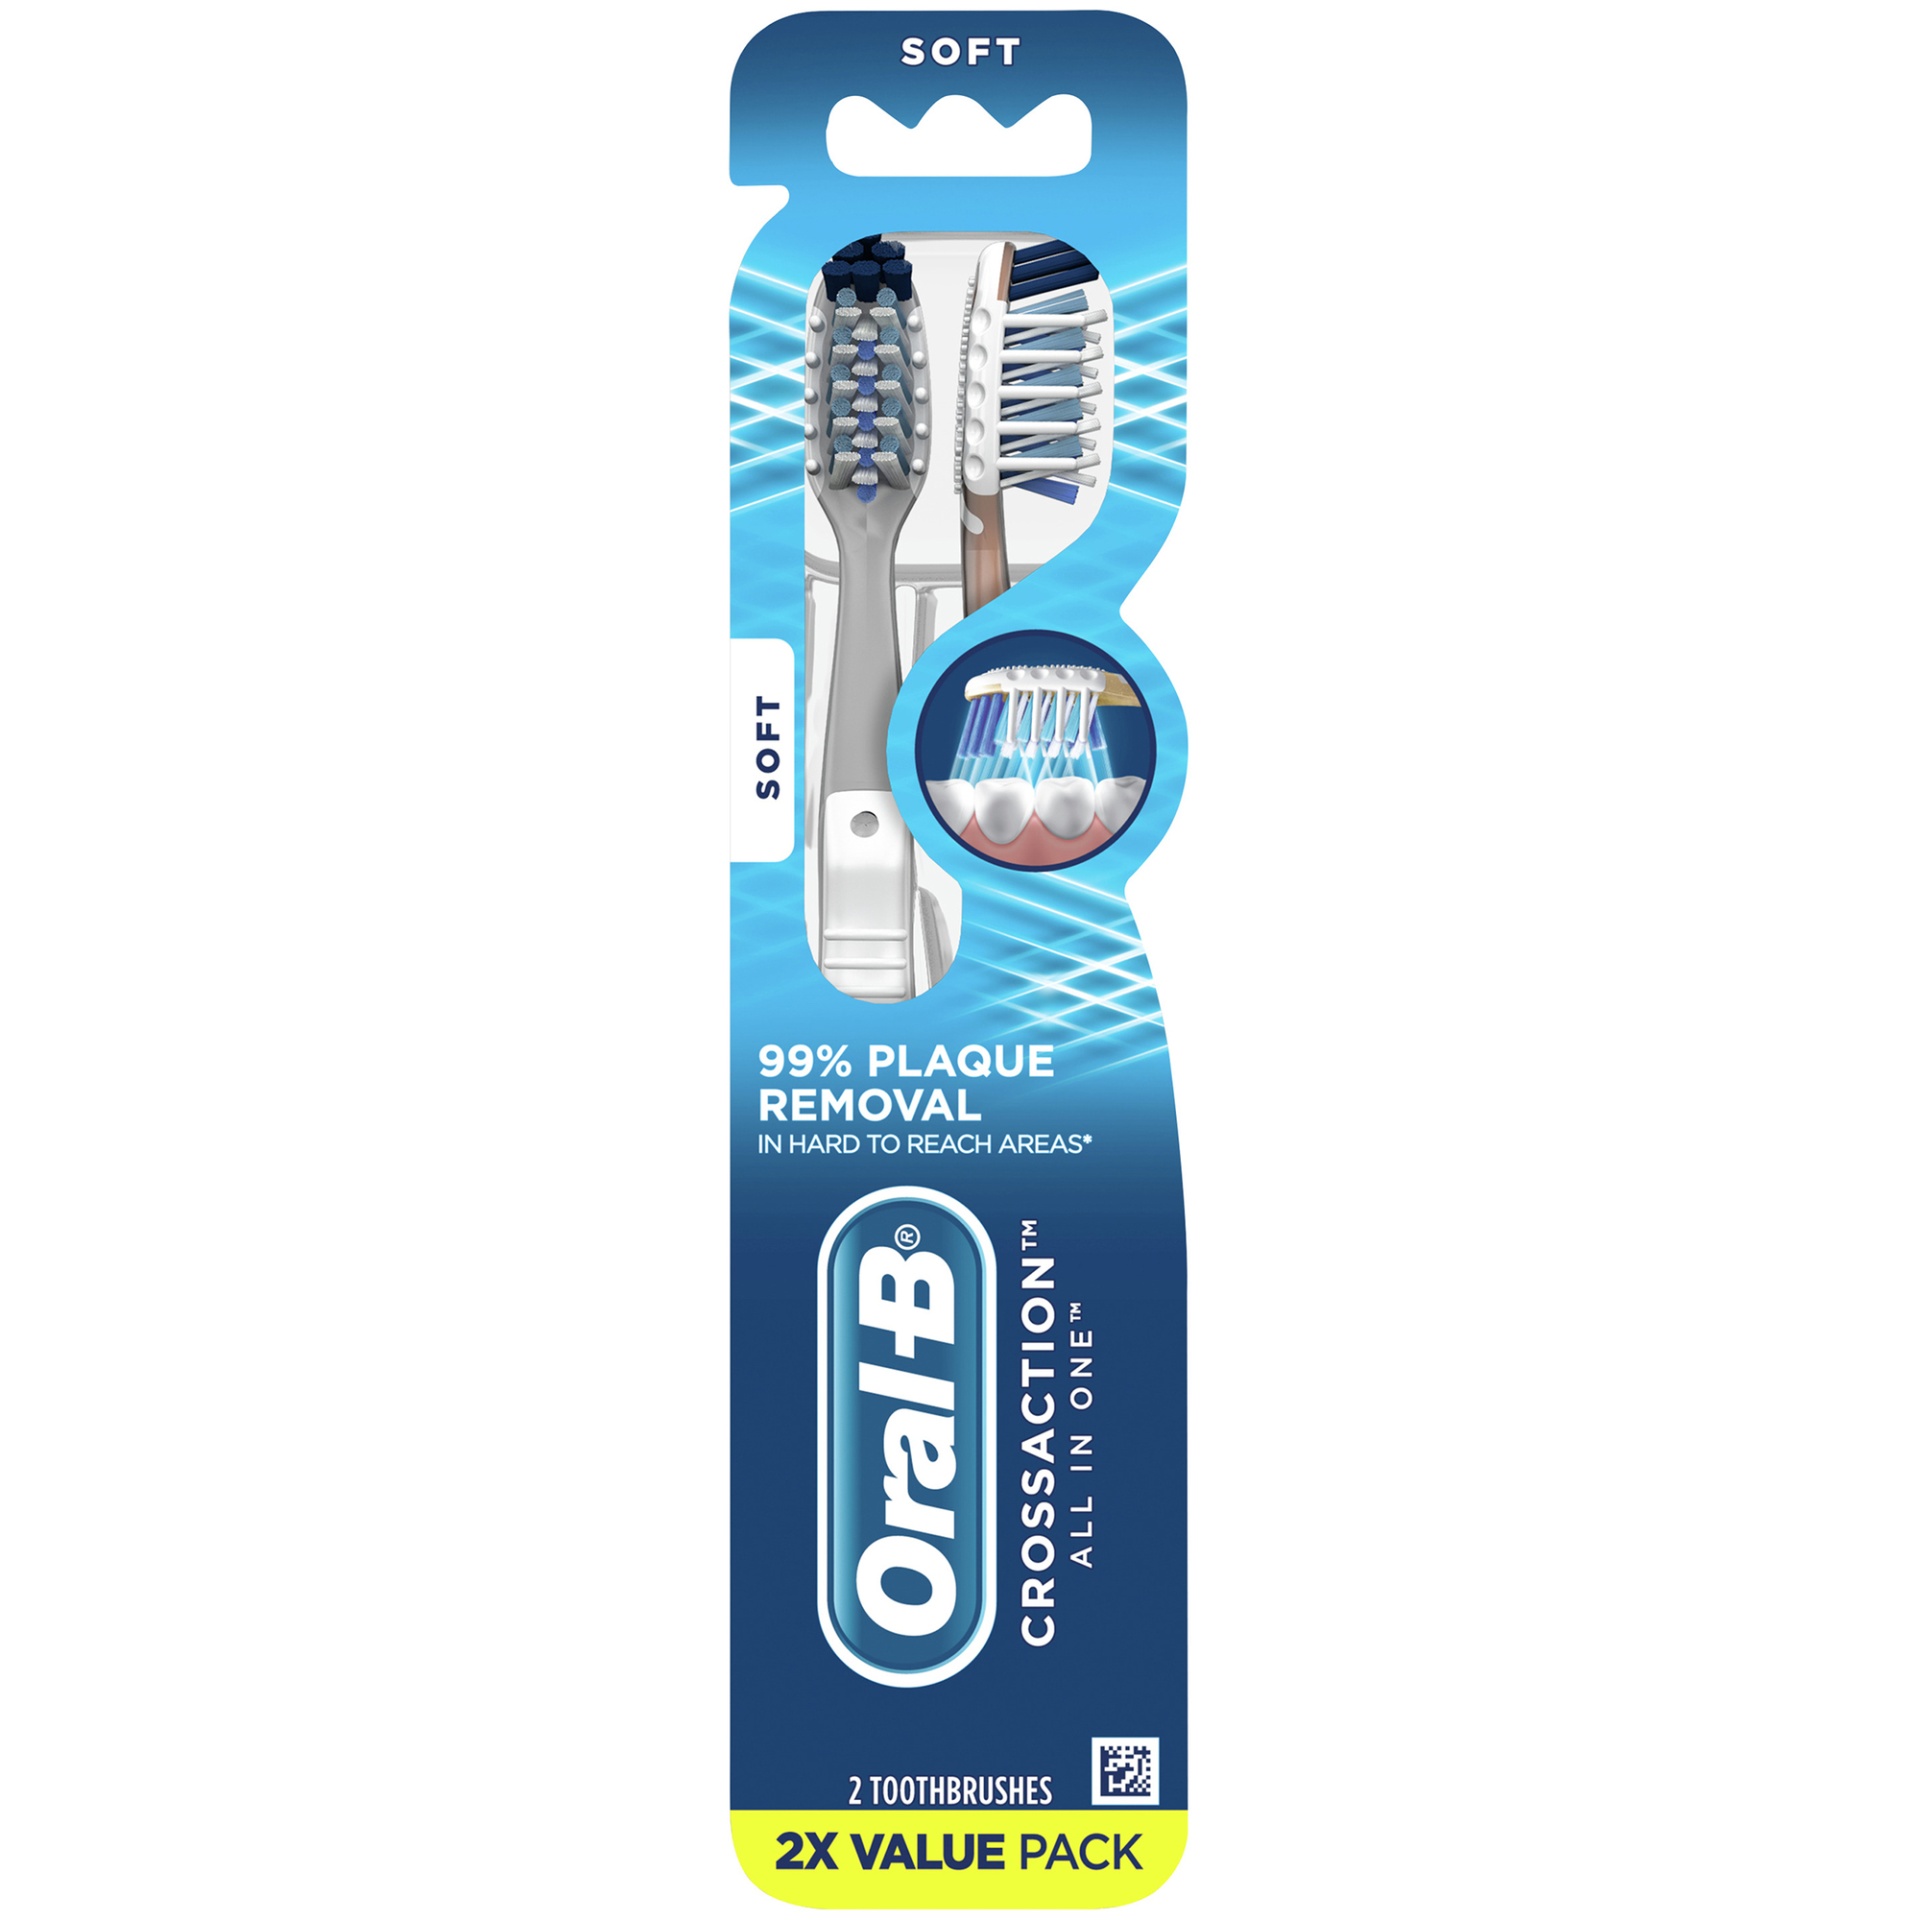 slide 1 of 9, Oral B Soft Value Pack Toothbrushes 2 ea, 2 ct